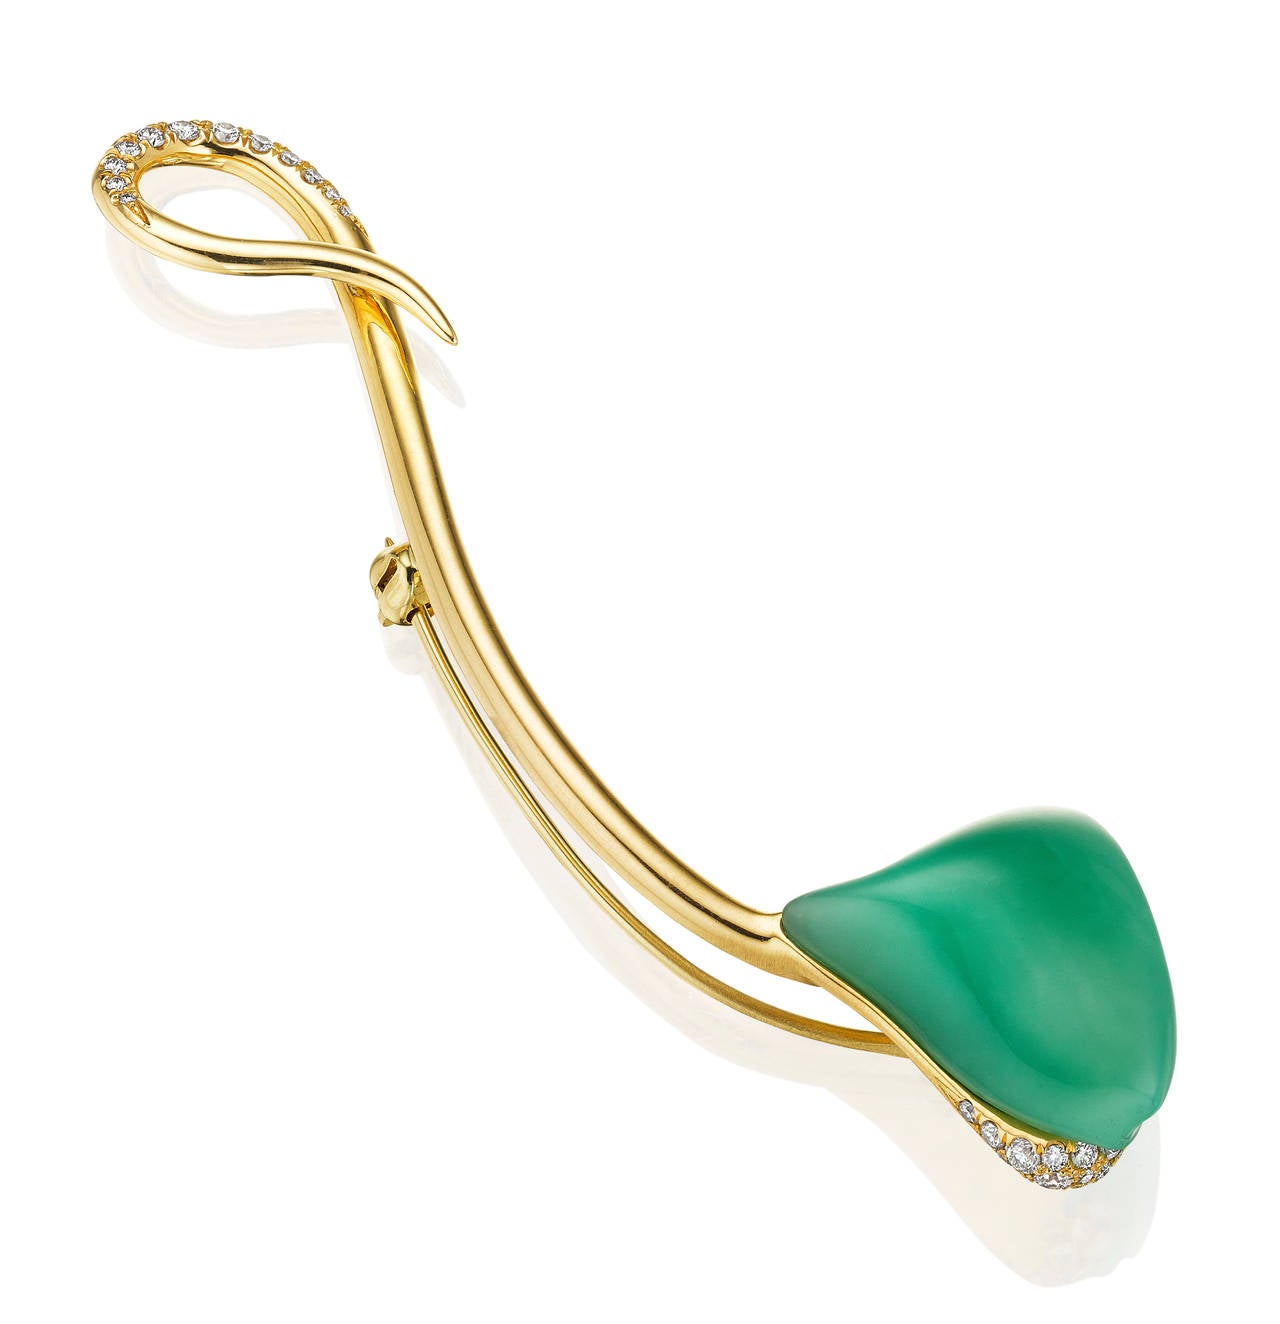 Adorable. This one-of-a-kind brooch features a hand-carved chrysoprase blossom blooming on an 18K yellow gold stem embellished with a sparkle of VS F-G white diamonds. Frequently mistaken for excellent jadite jade, this is very high quality